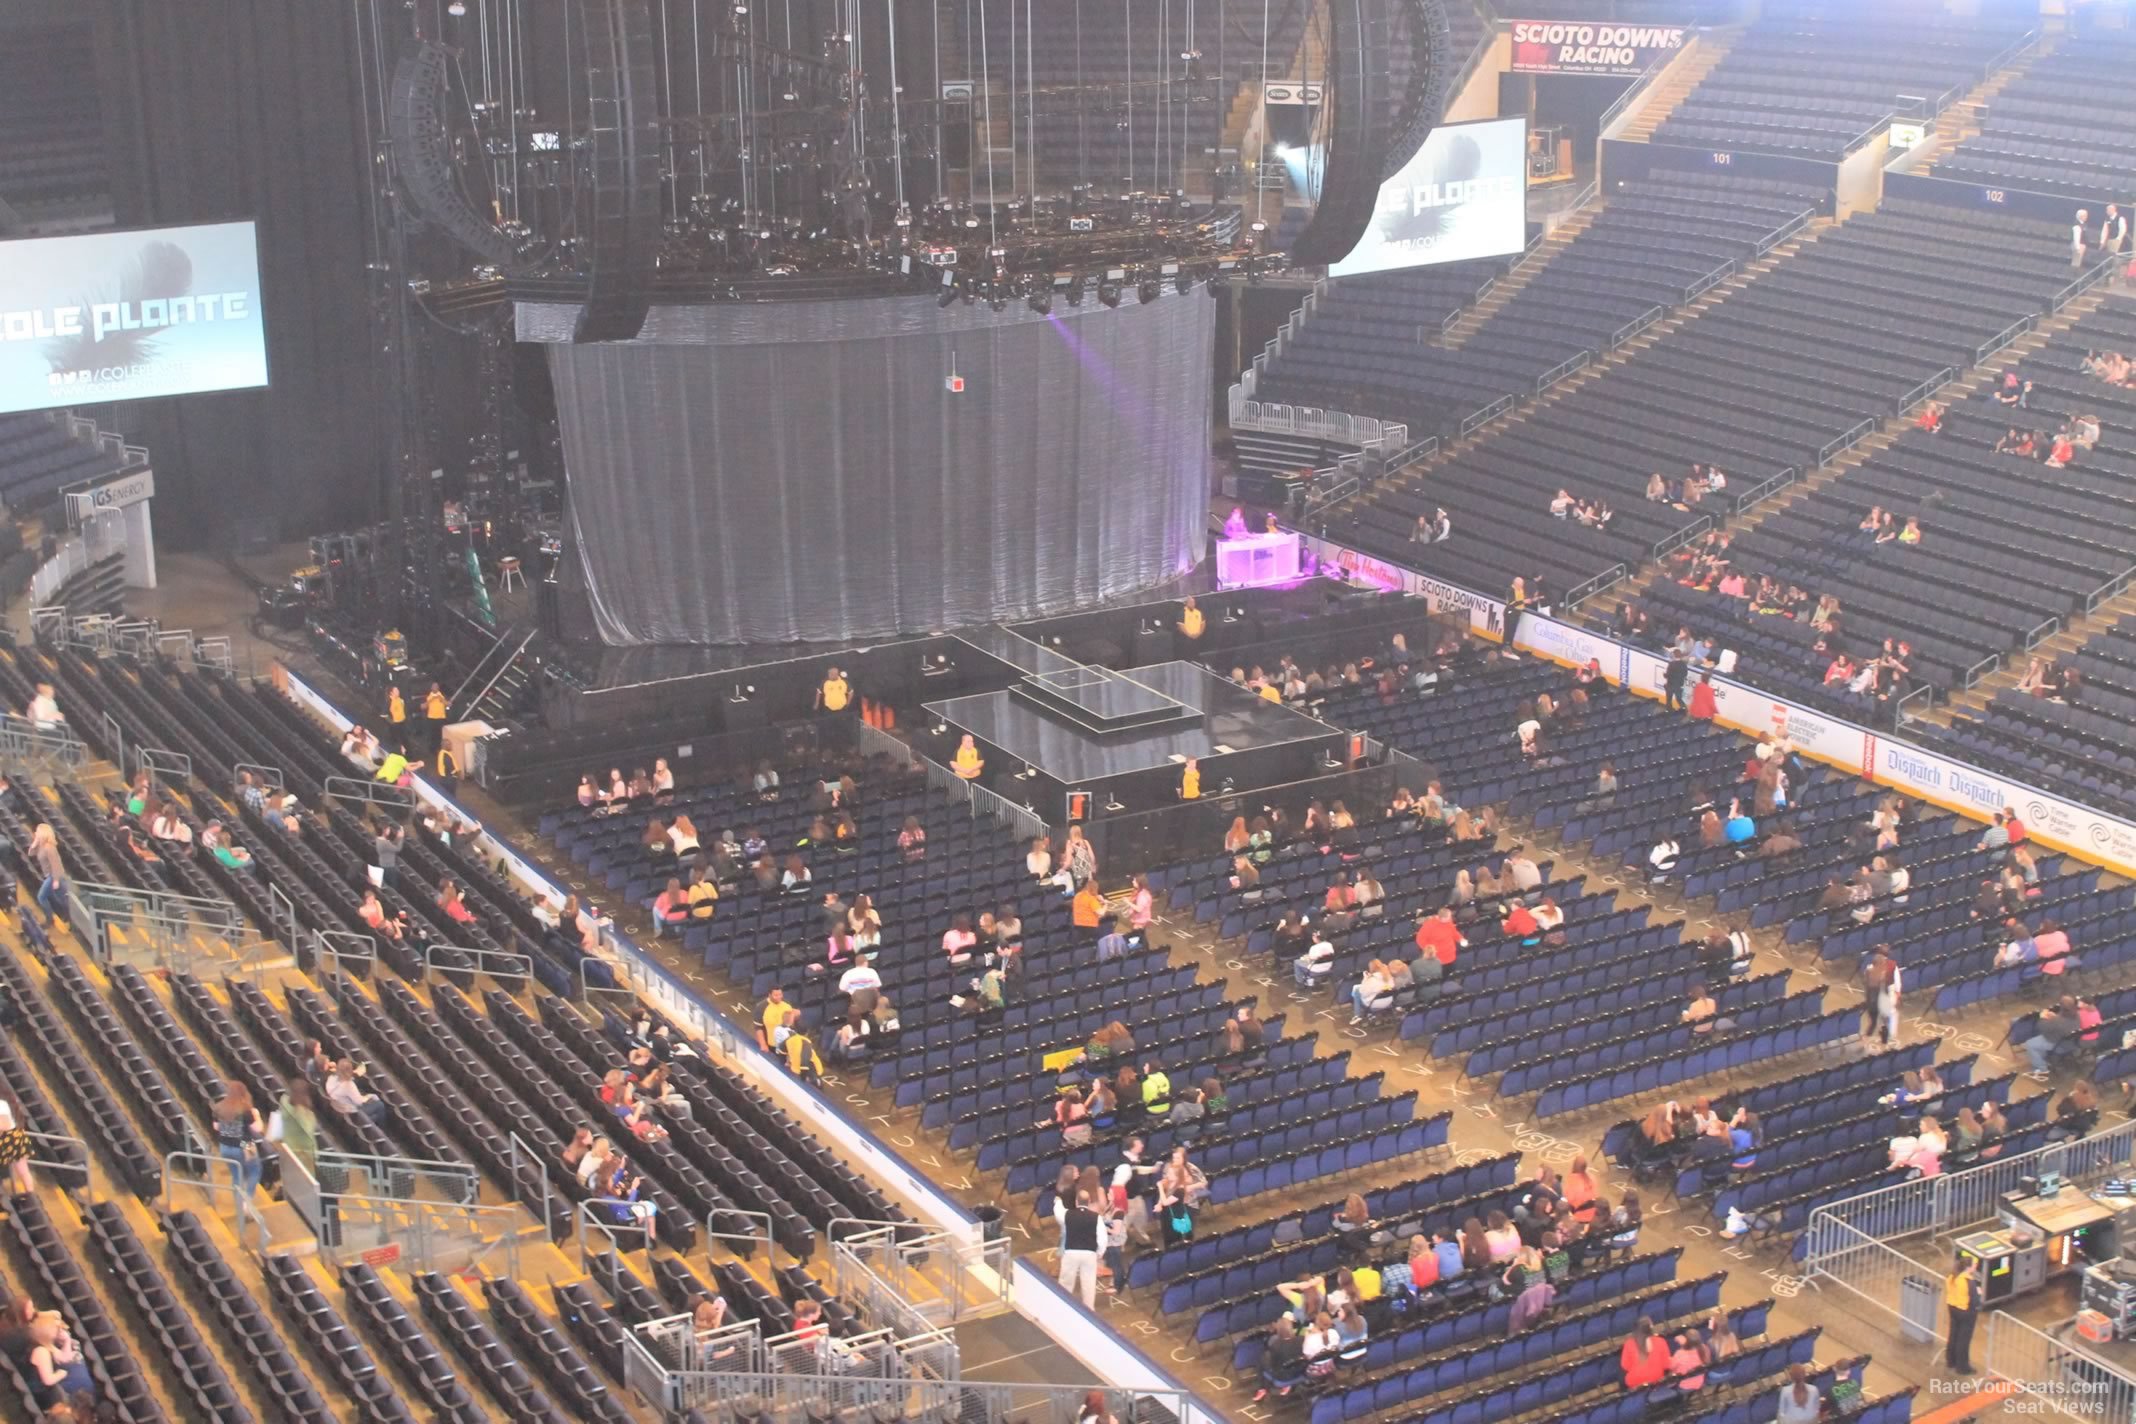 Section 214 at Nationwide Arena for Concerts